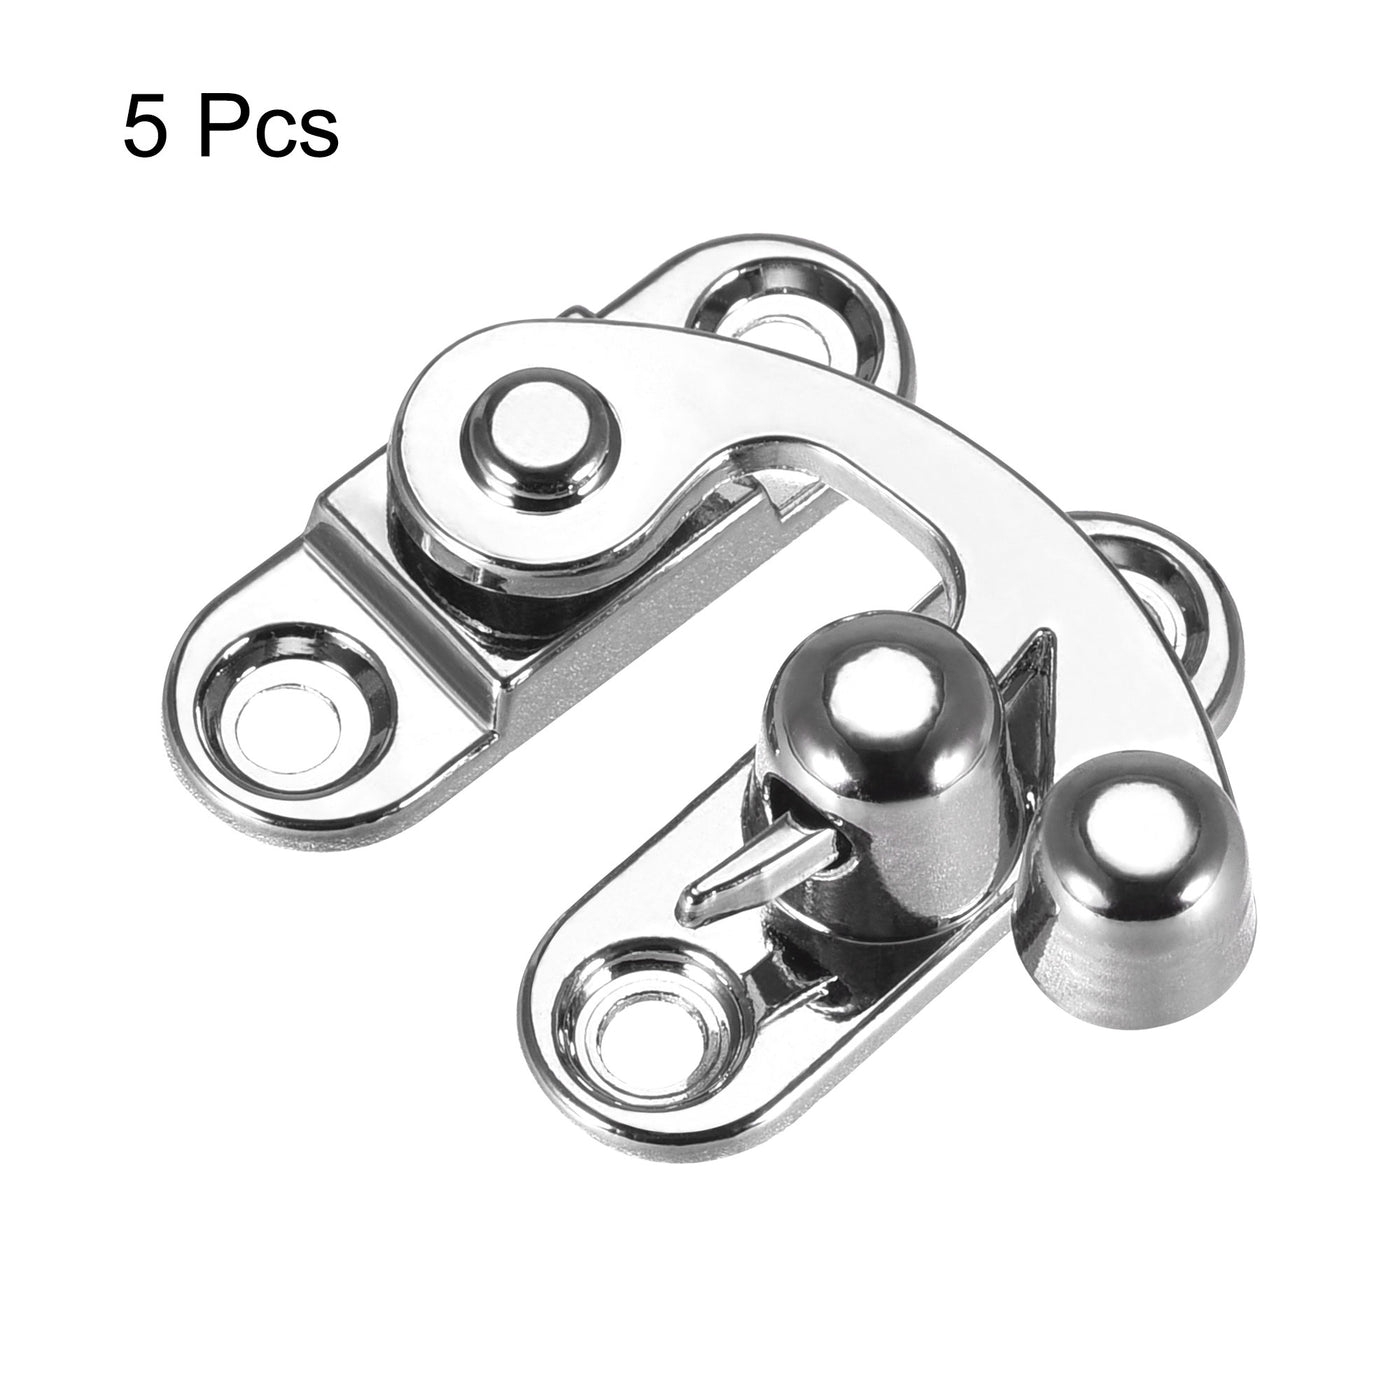 uxcell Uxcell Antique Vintage Lock Clasp Right Latch Hook Hasp 32mmx28mm Swing Arm Latch Silver Tone 5 Pcs